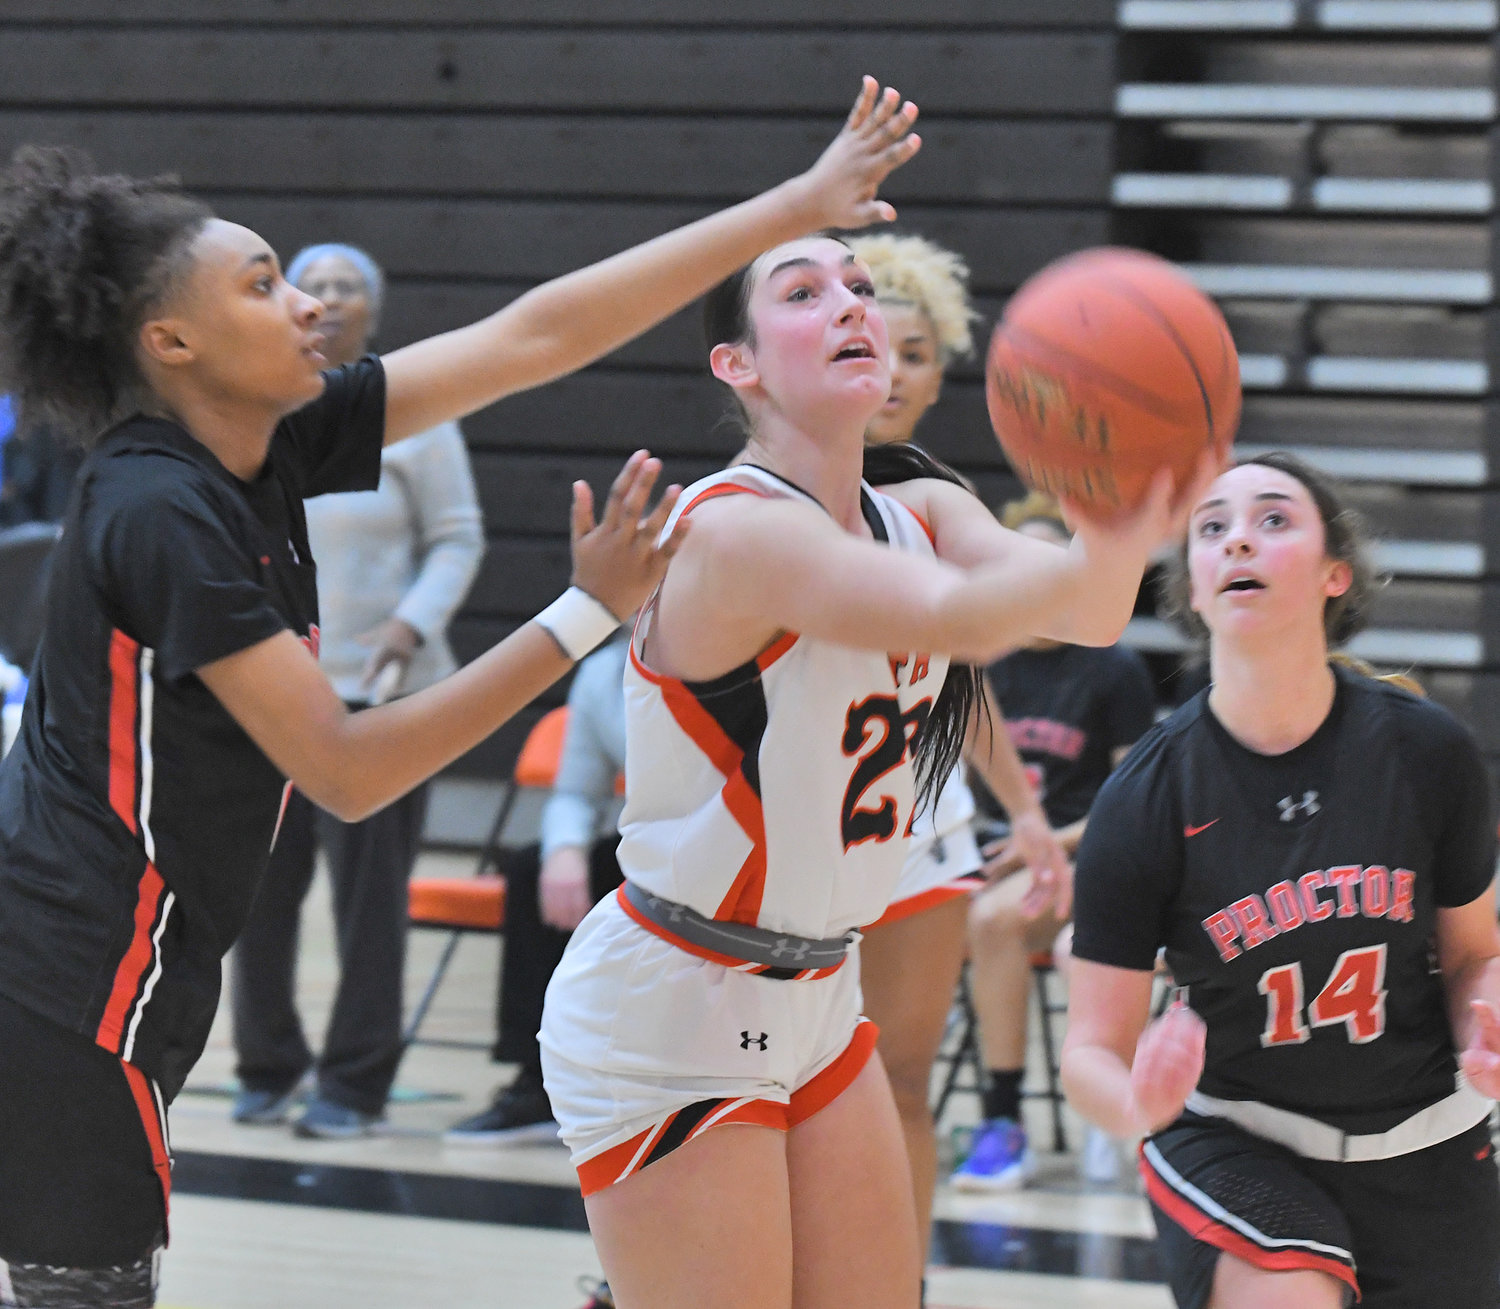 Rome Free Academy's Mia Mirabelli scoops the ball under the arm of Proctor's Armanie Gordon, left, to score a basket in the first quarter at RFA Saturday. At right is Proctor's Kaia Singleton.